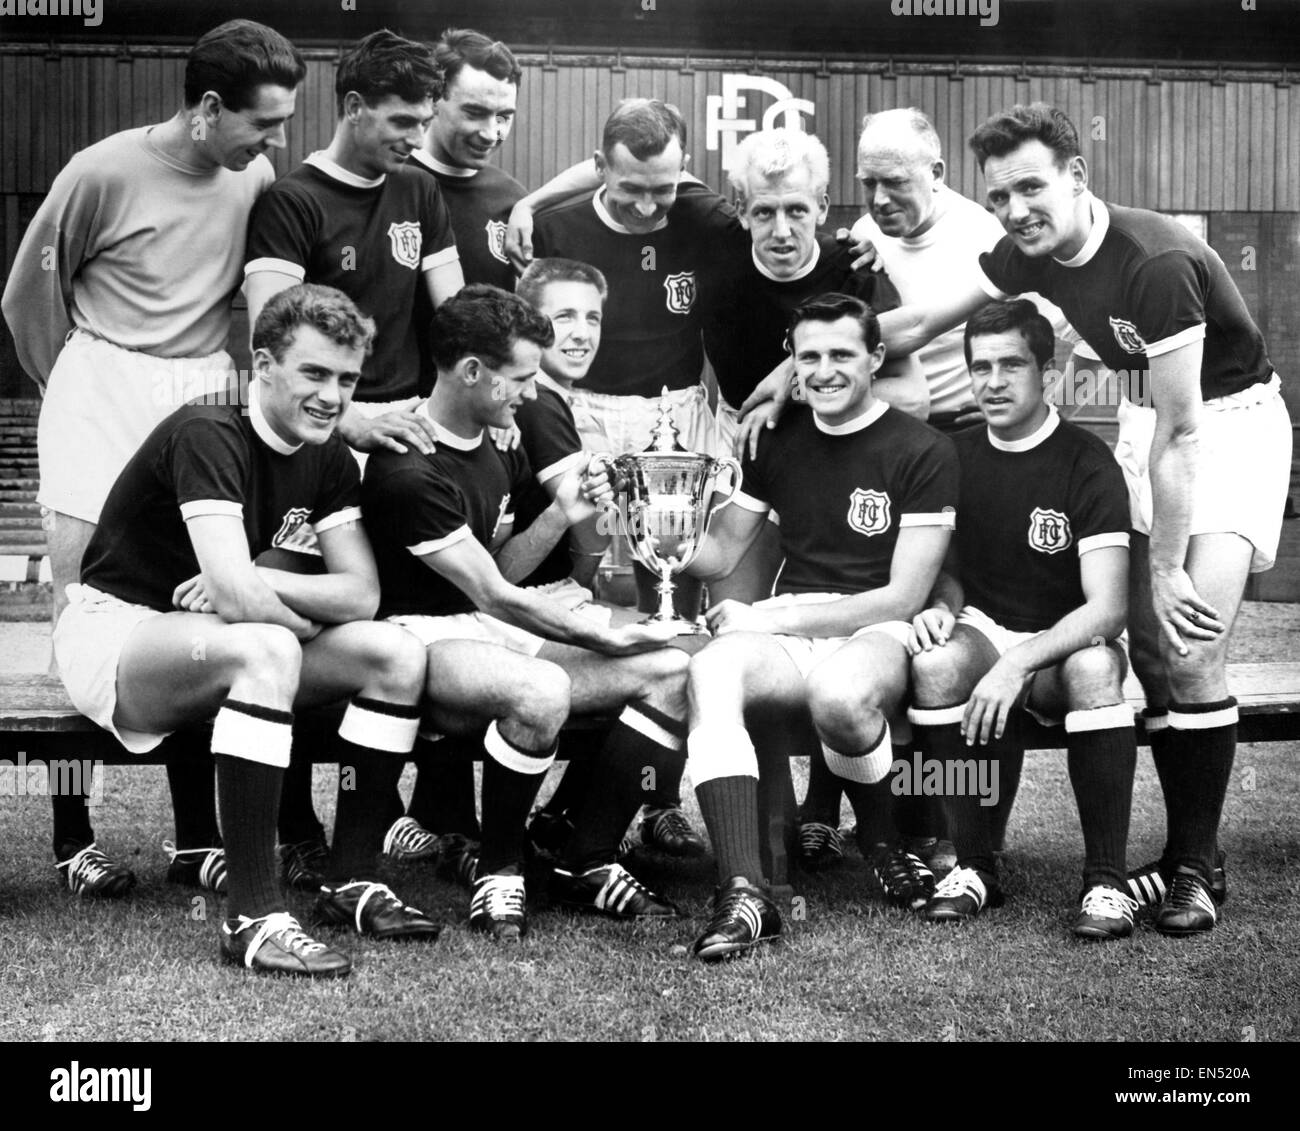 Dundee Scottish League champions, 1961/62, Photocall with trophy, Back row  left to right: Pat Liney, Gordon Smith, Alan Gilzean, Bobby Wishart, Ian  Ure, trainer Sammy Kean and right half Bobby Seith, Front